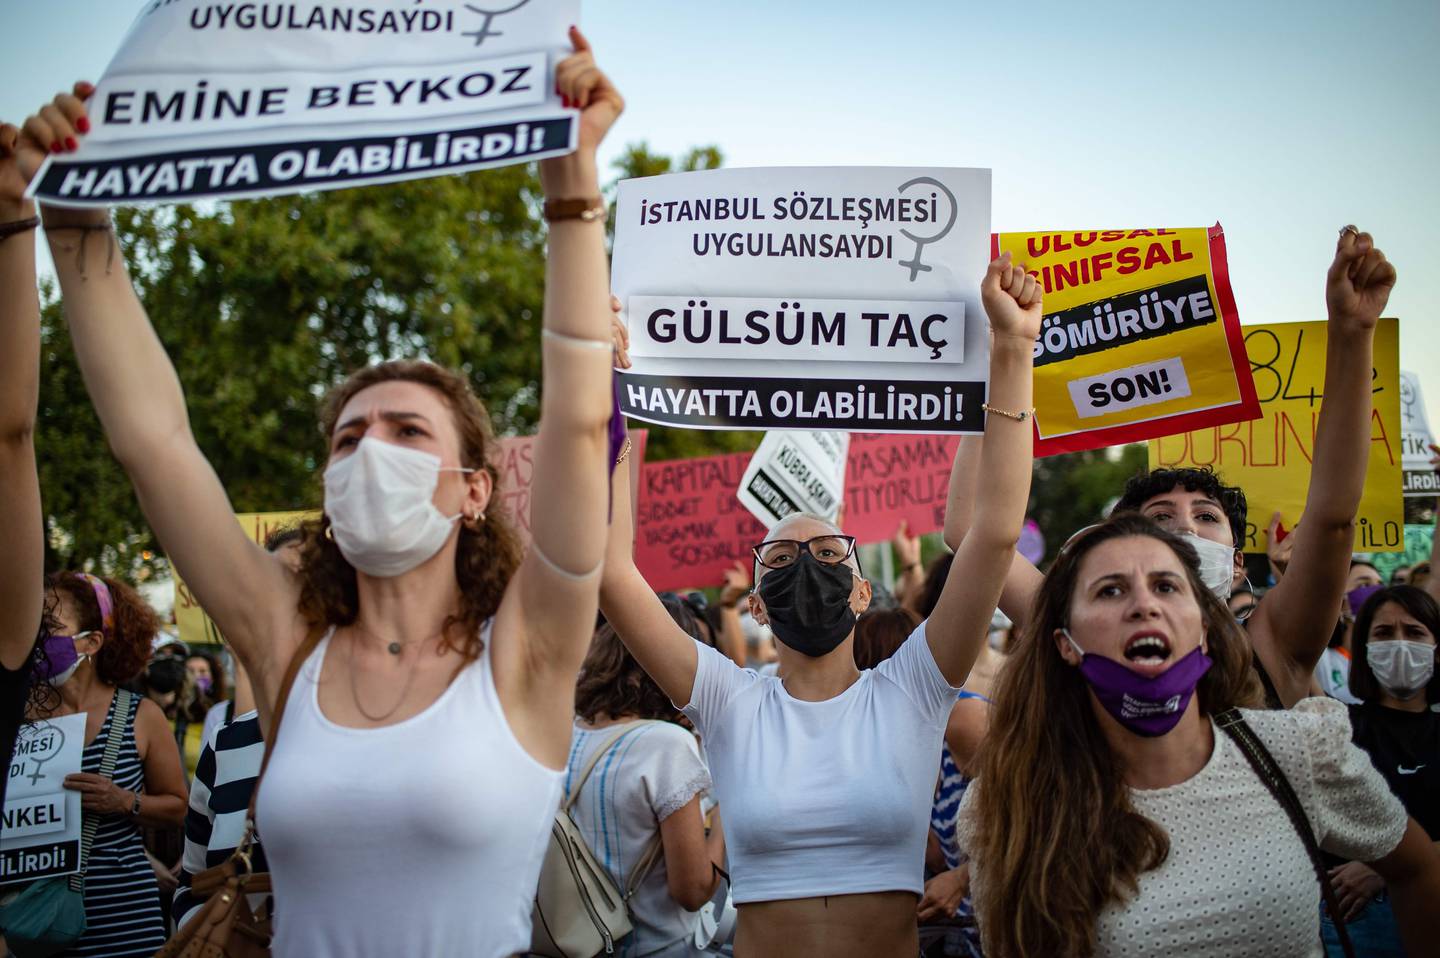 Demonstrators wearing protective face masks hold up placards with names of women during a demonstration for a better implementation of the Istanbul Convention and the Turkish Law 6284 for the protection of the family and prevention of violence against women, in Istanbul, Turkey, on August 5, 2020. (Photo by Yasin AKGUL / AFP)